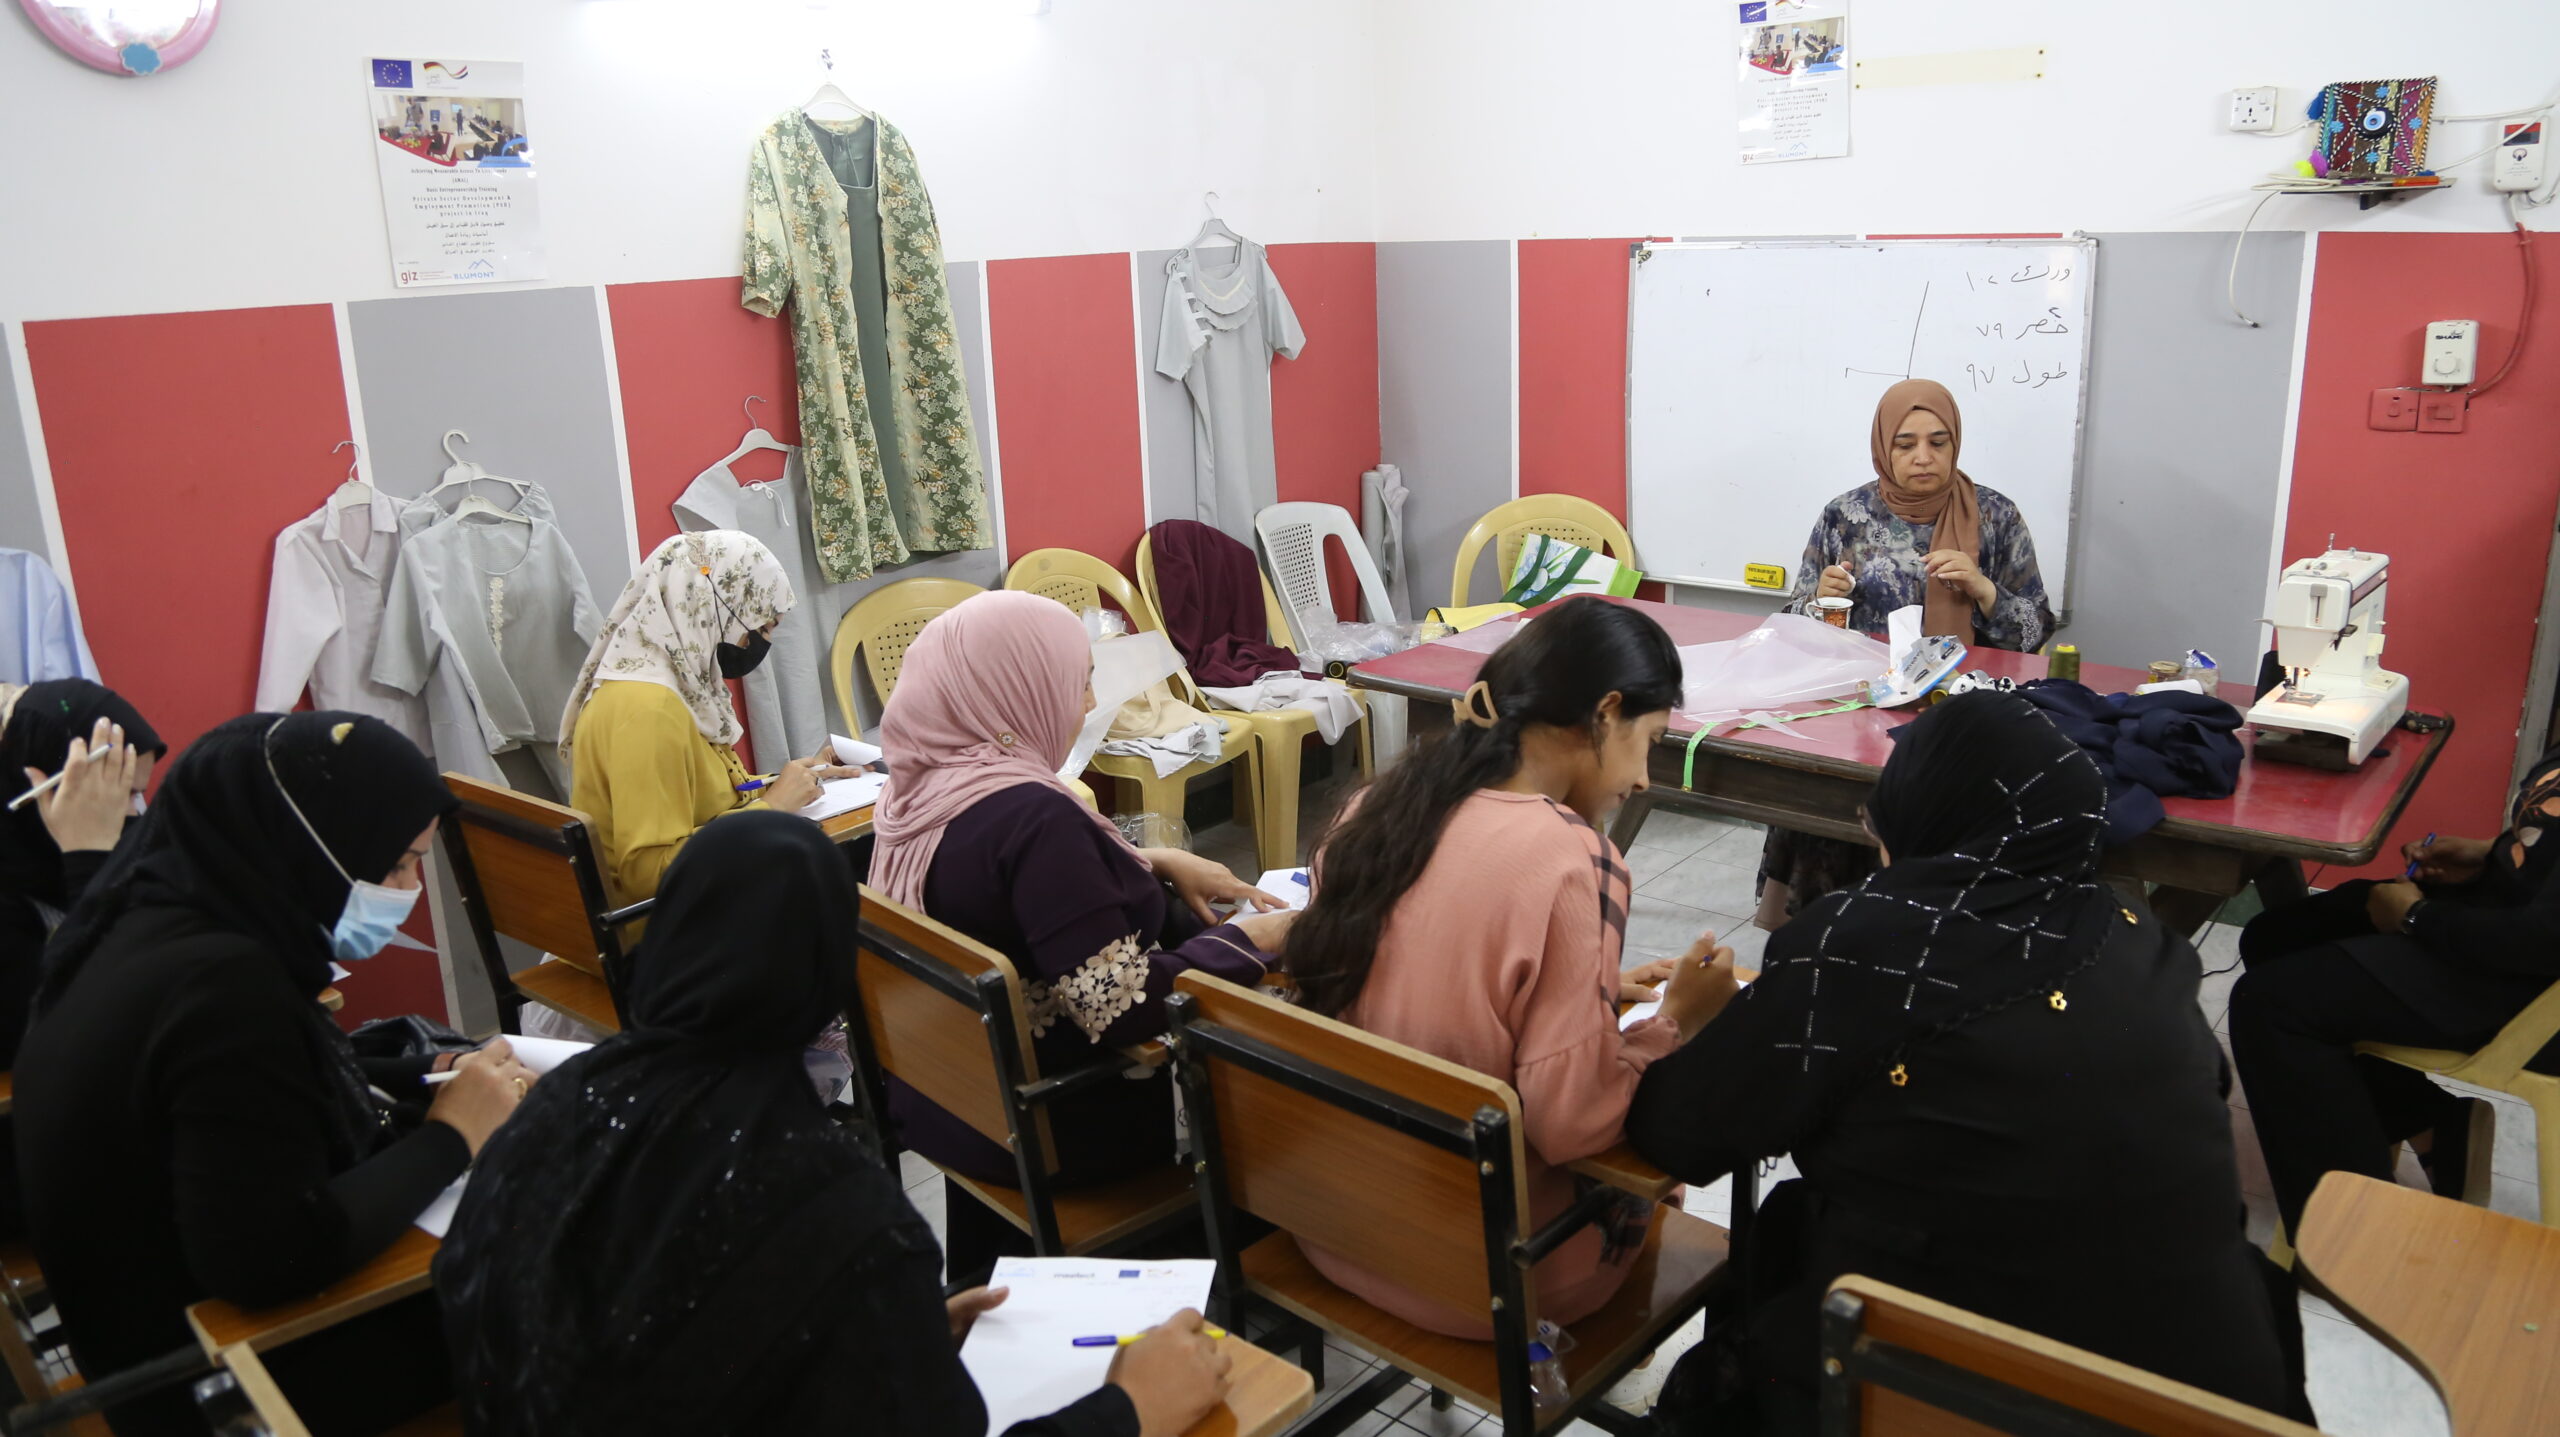 women in a classroom learning to sew